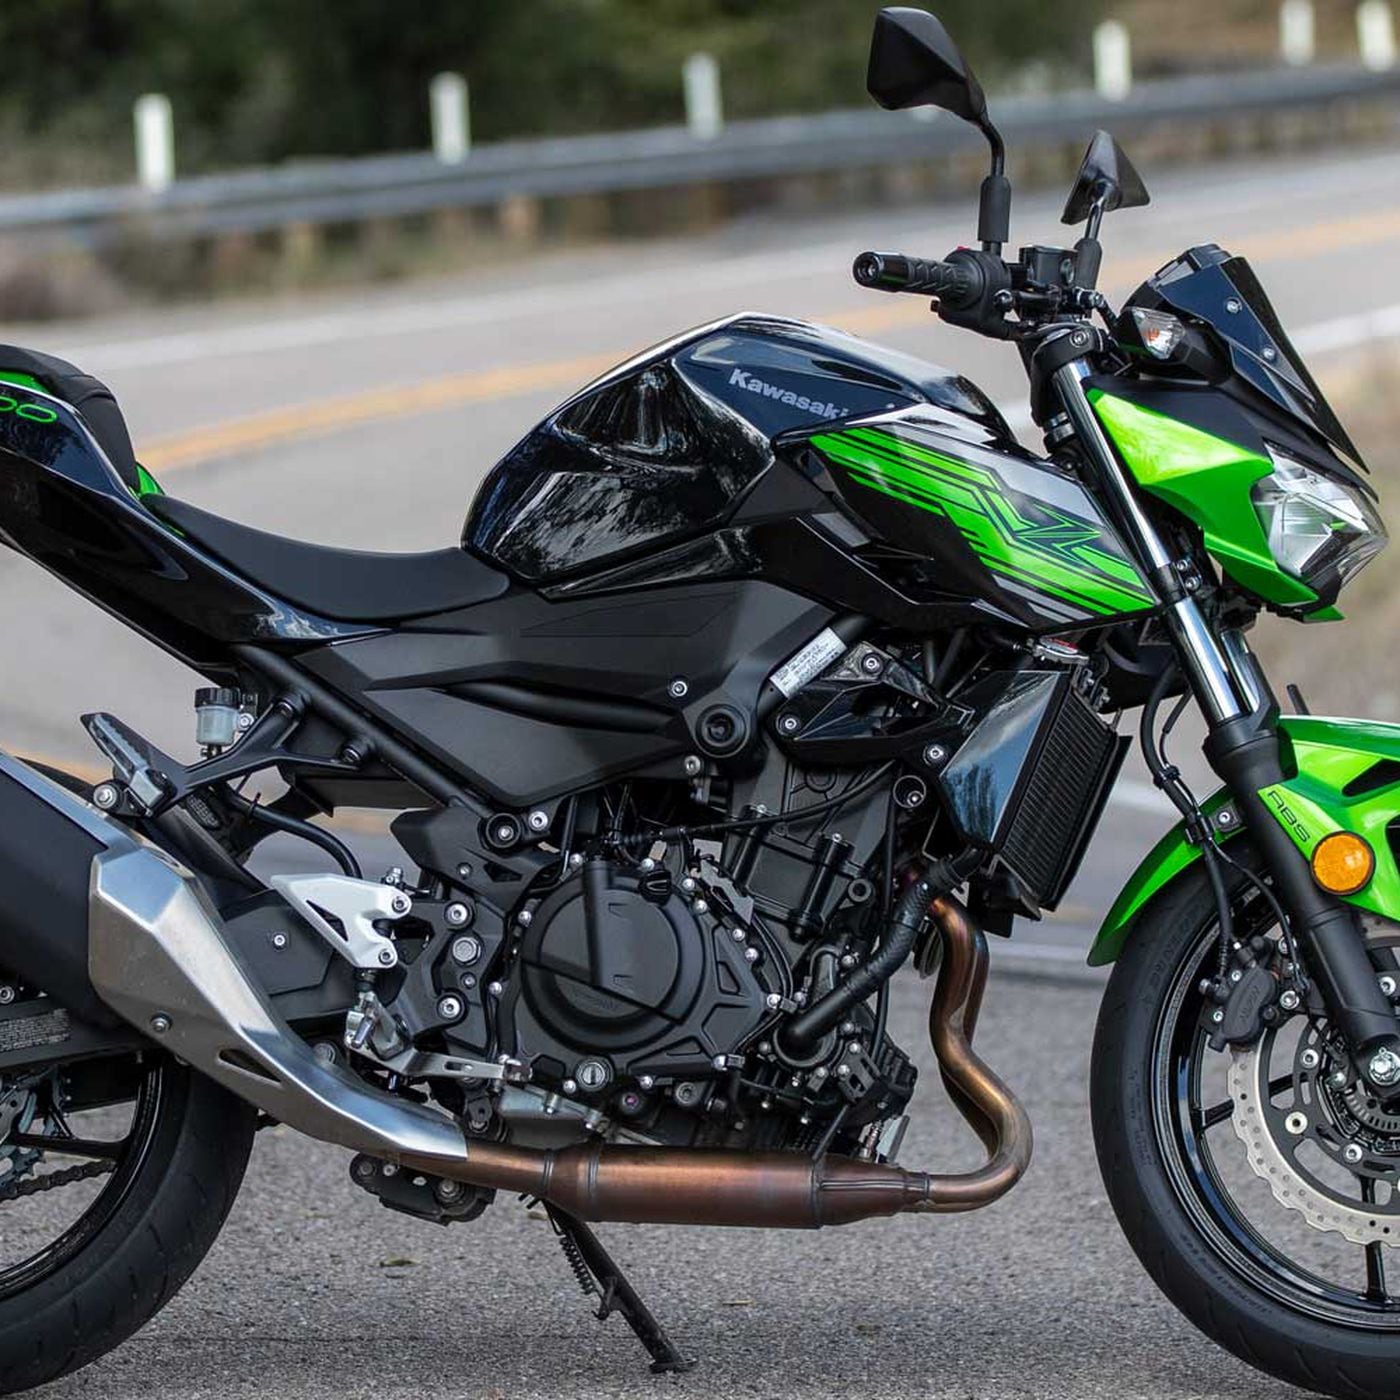 afbryde Blossom absurd It's Easy Being Green Aboard The 2019 Kawasaki Z400 | Cycle World